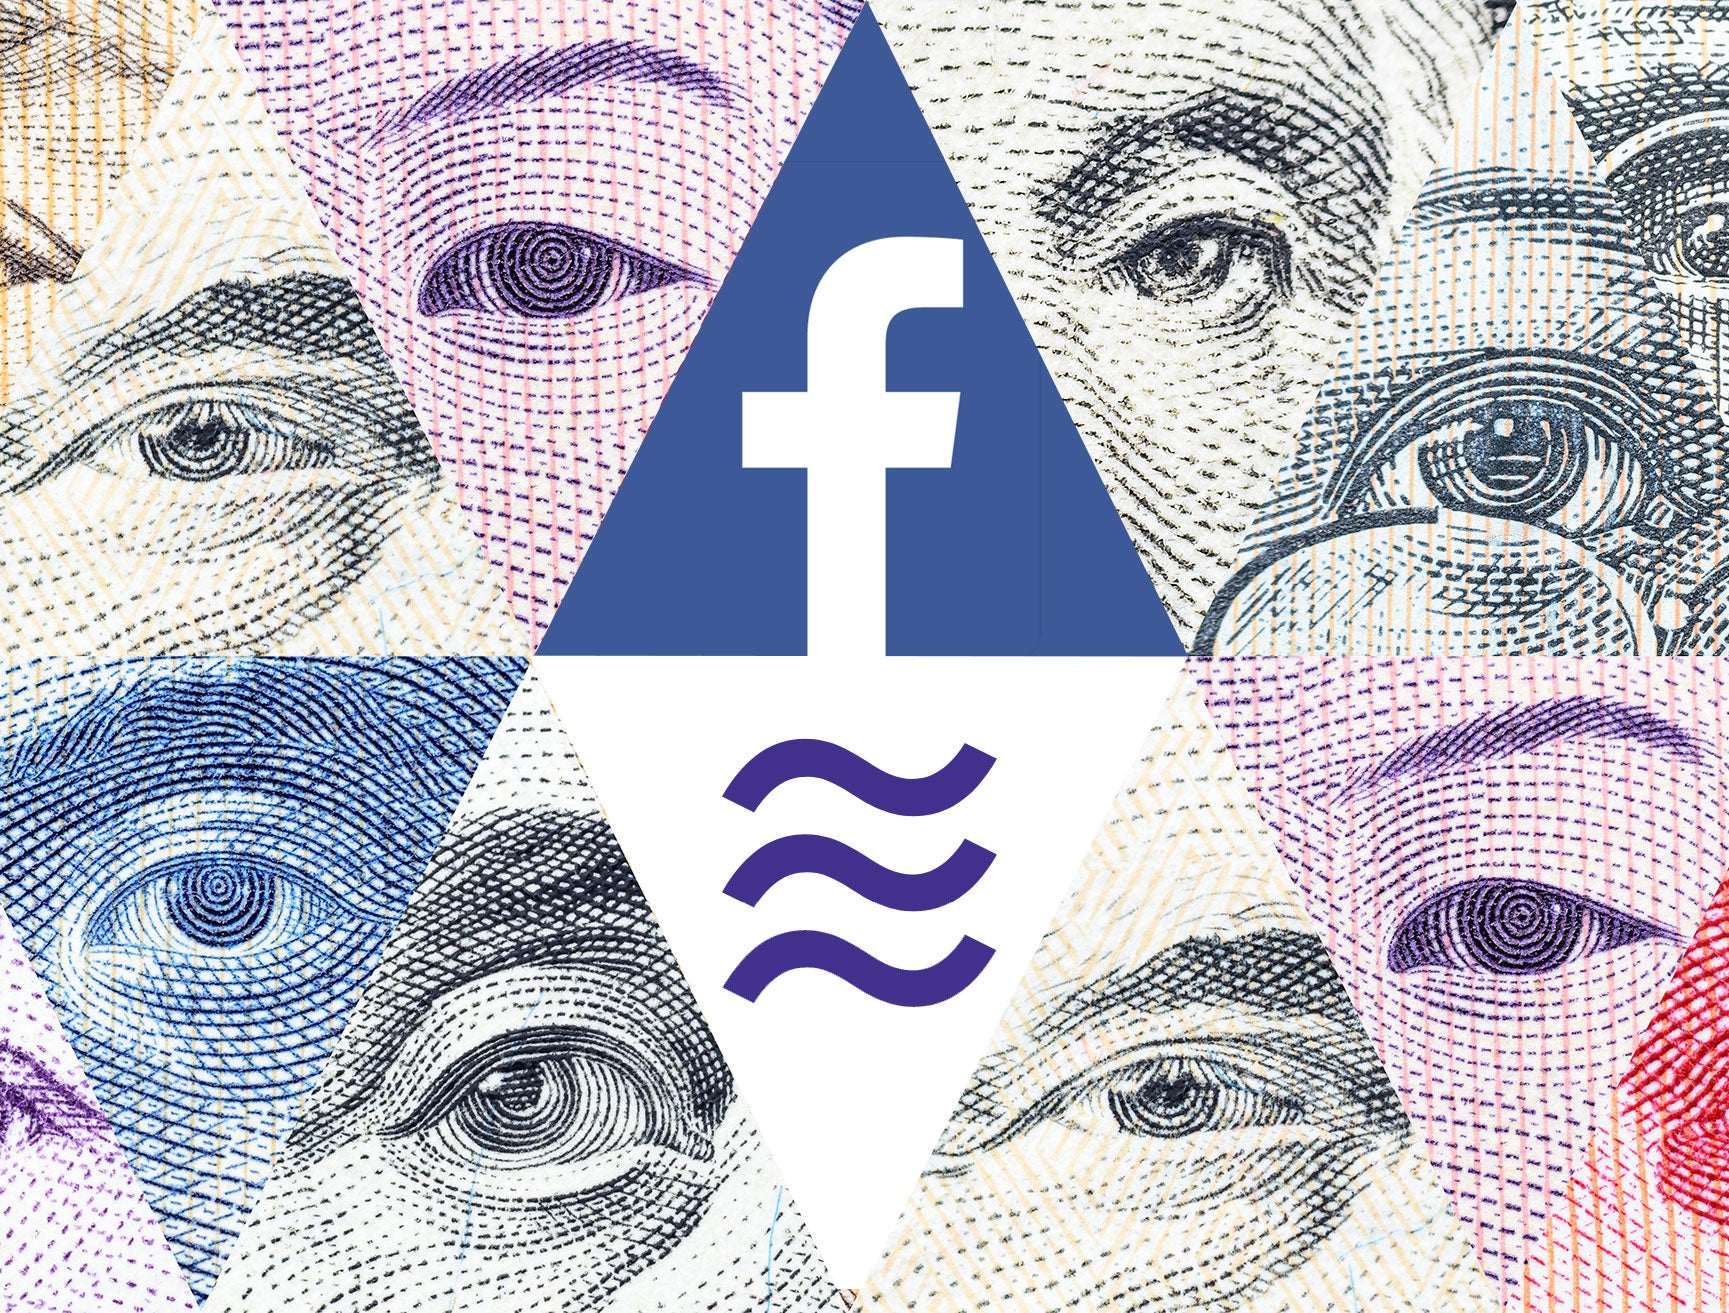 Libra is Facebook’s bid to become the world’s currency – should we be worried?